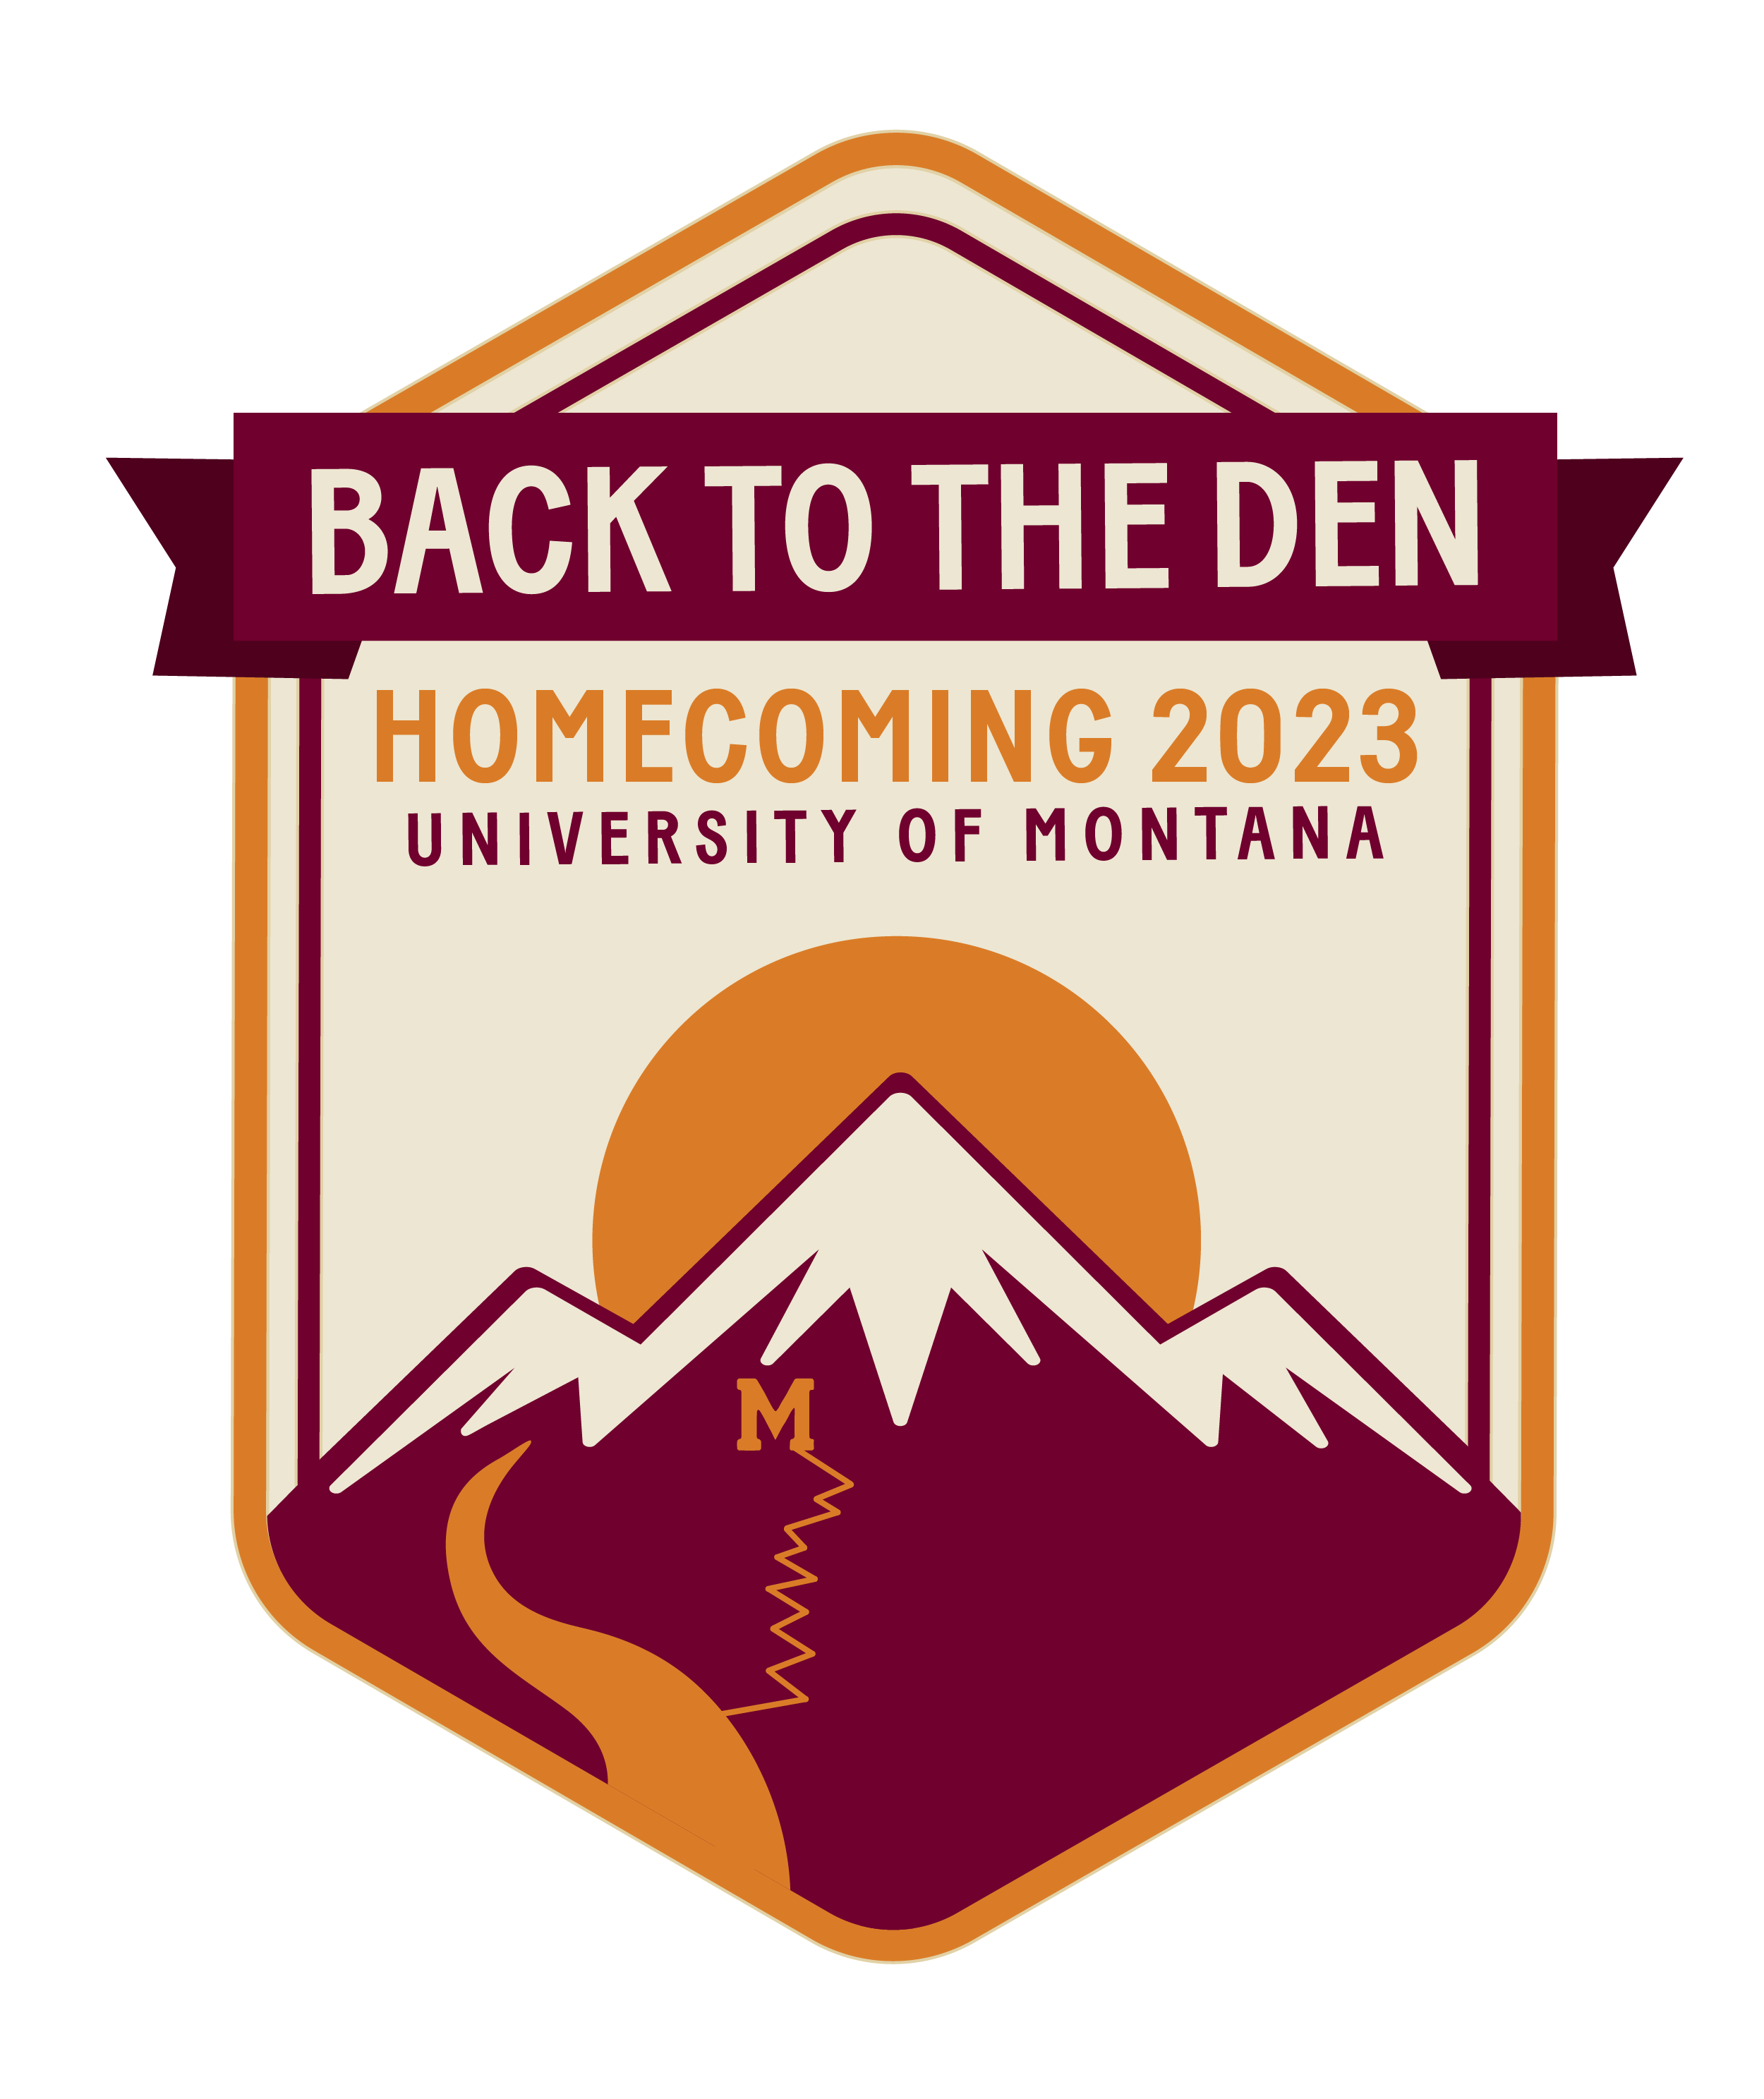 Homecoming 2023 logo with displayed theme - "Back to the Den"